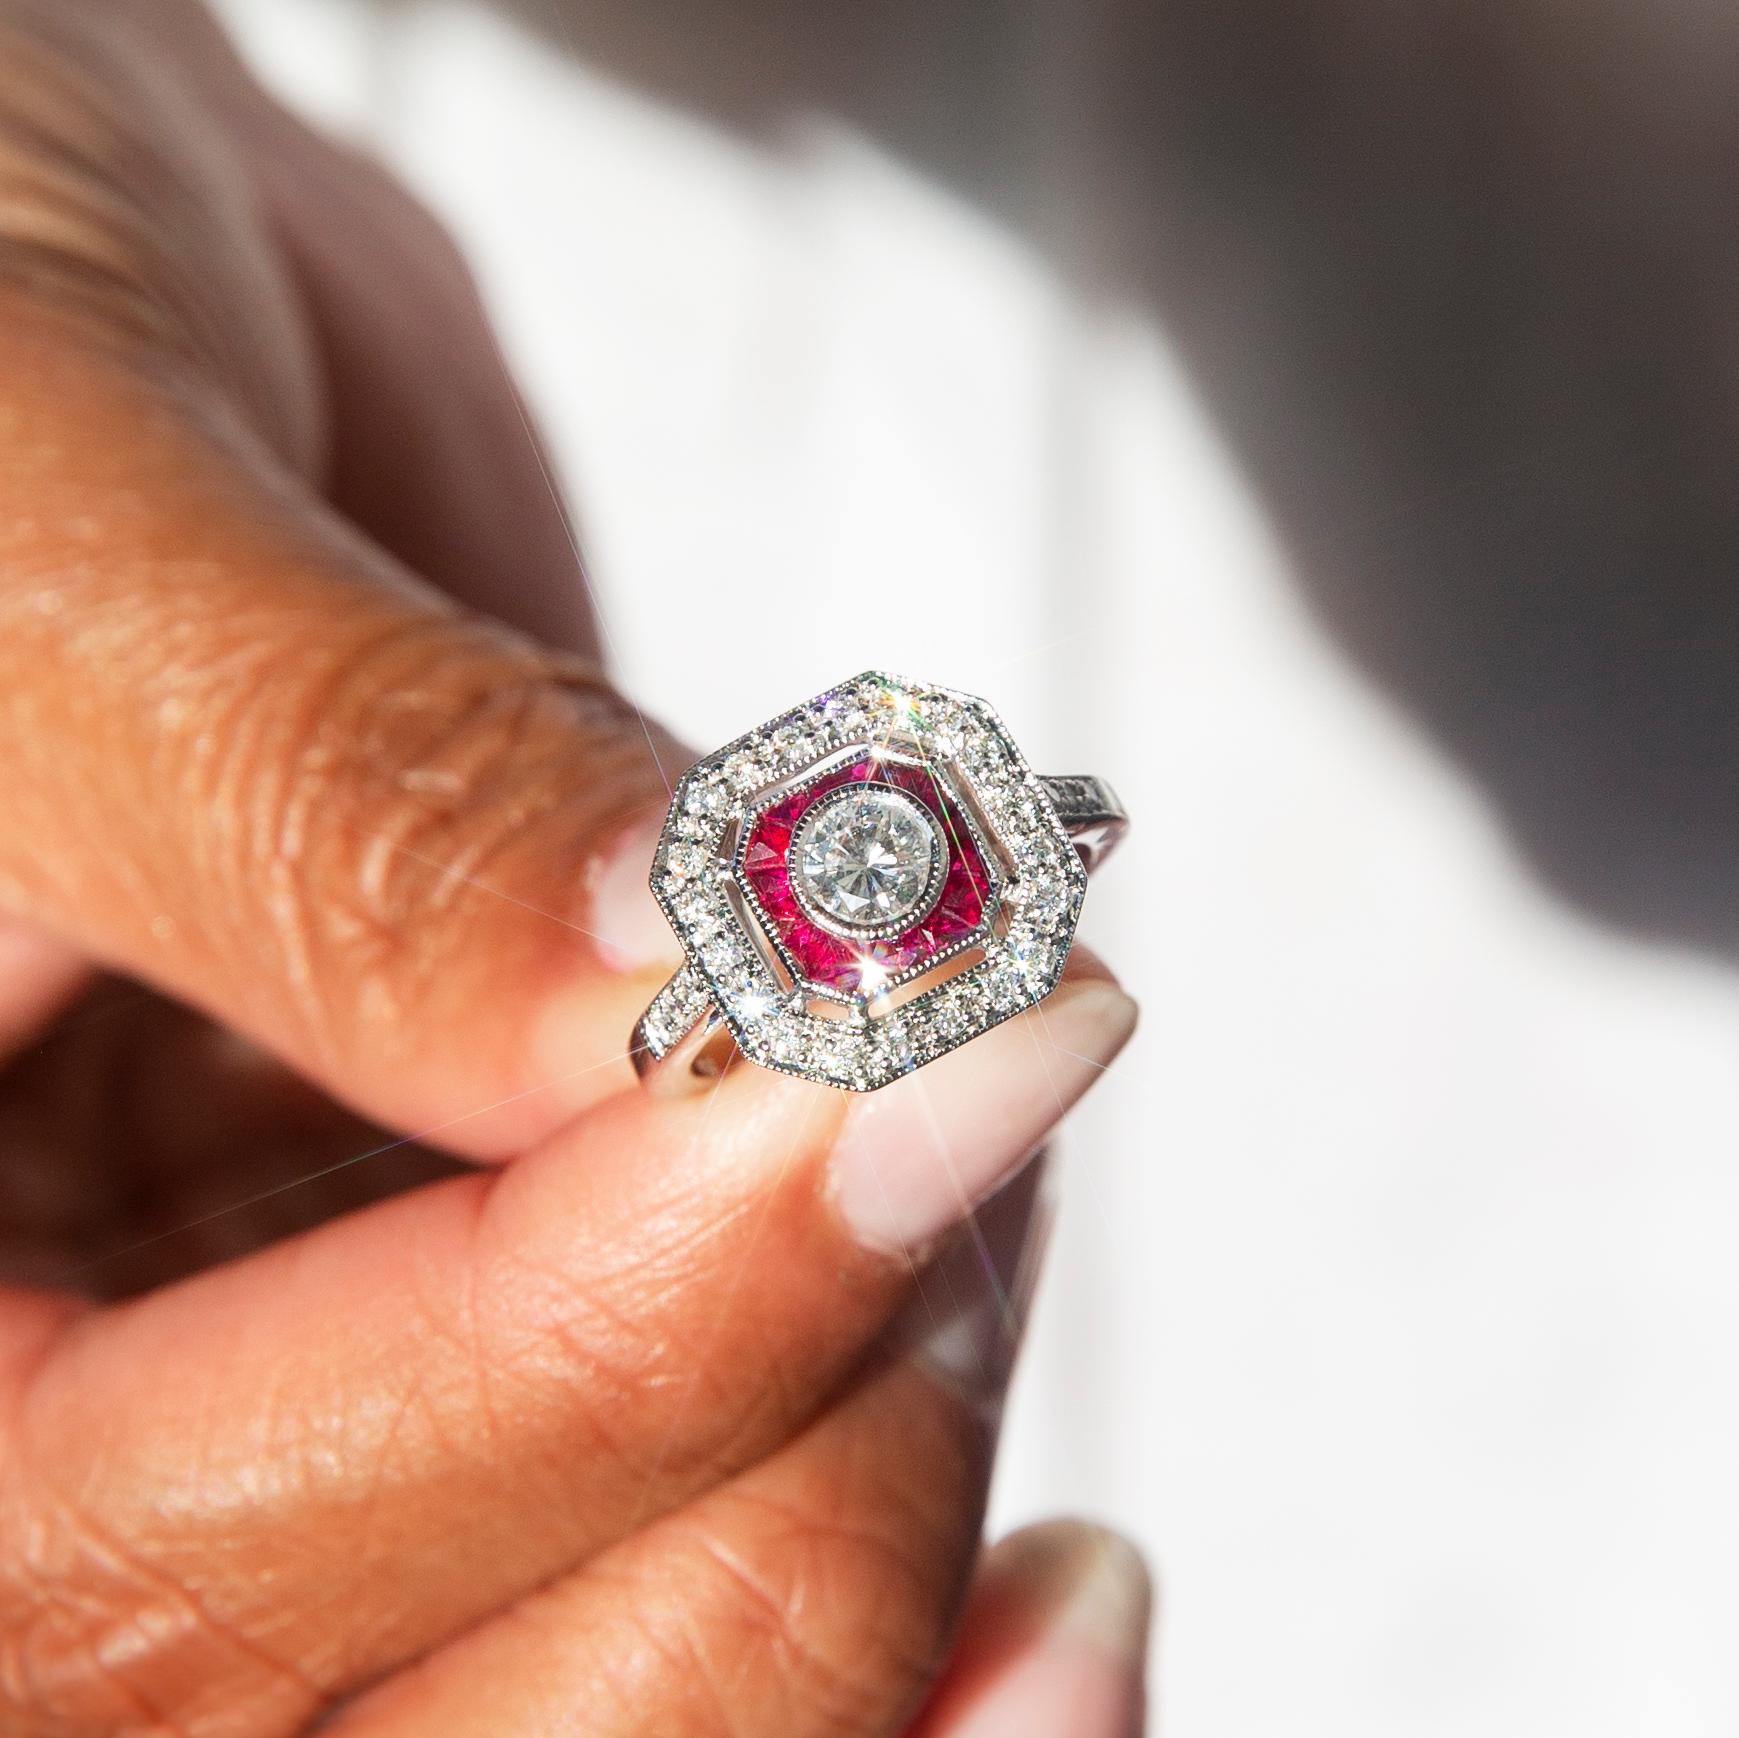 Crafted in 18 carat white gold, this stunning art deco-inspired halo ring features a gorgeous certified 0.38 carat round brilliant cut diamond encompassed by custom cut red rubies totalling 0.55 carats and an enchanting halo of glittering round